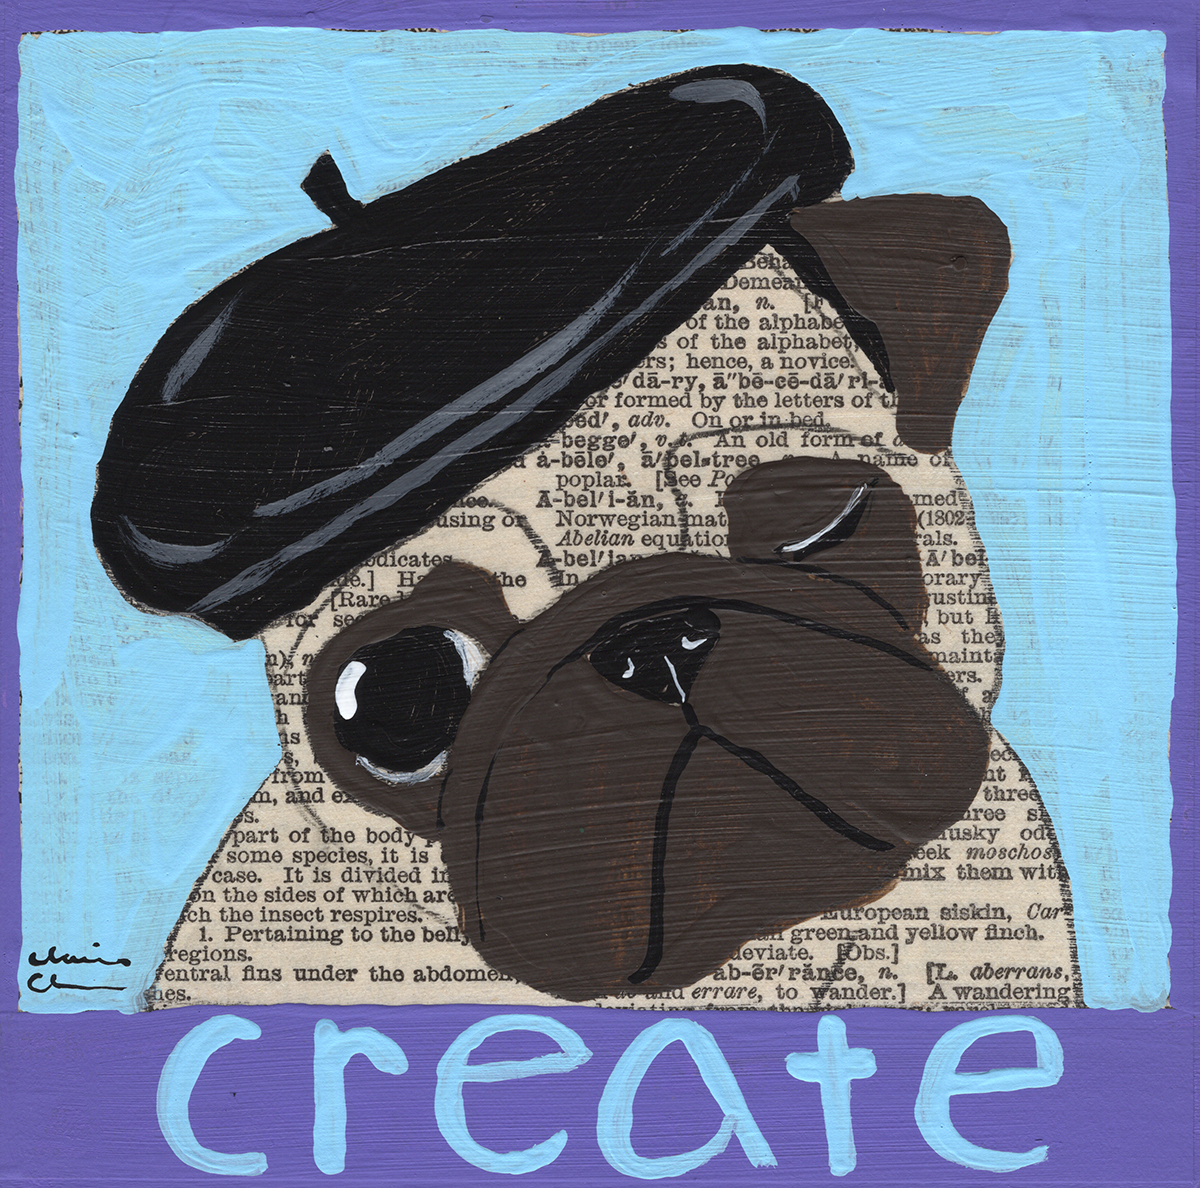 Create - Original Word of the Year Painting